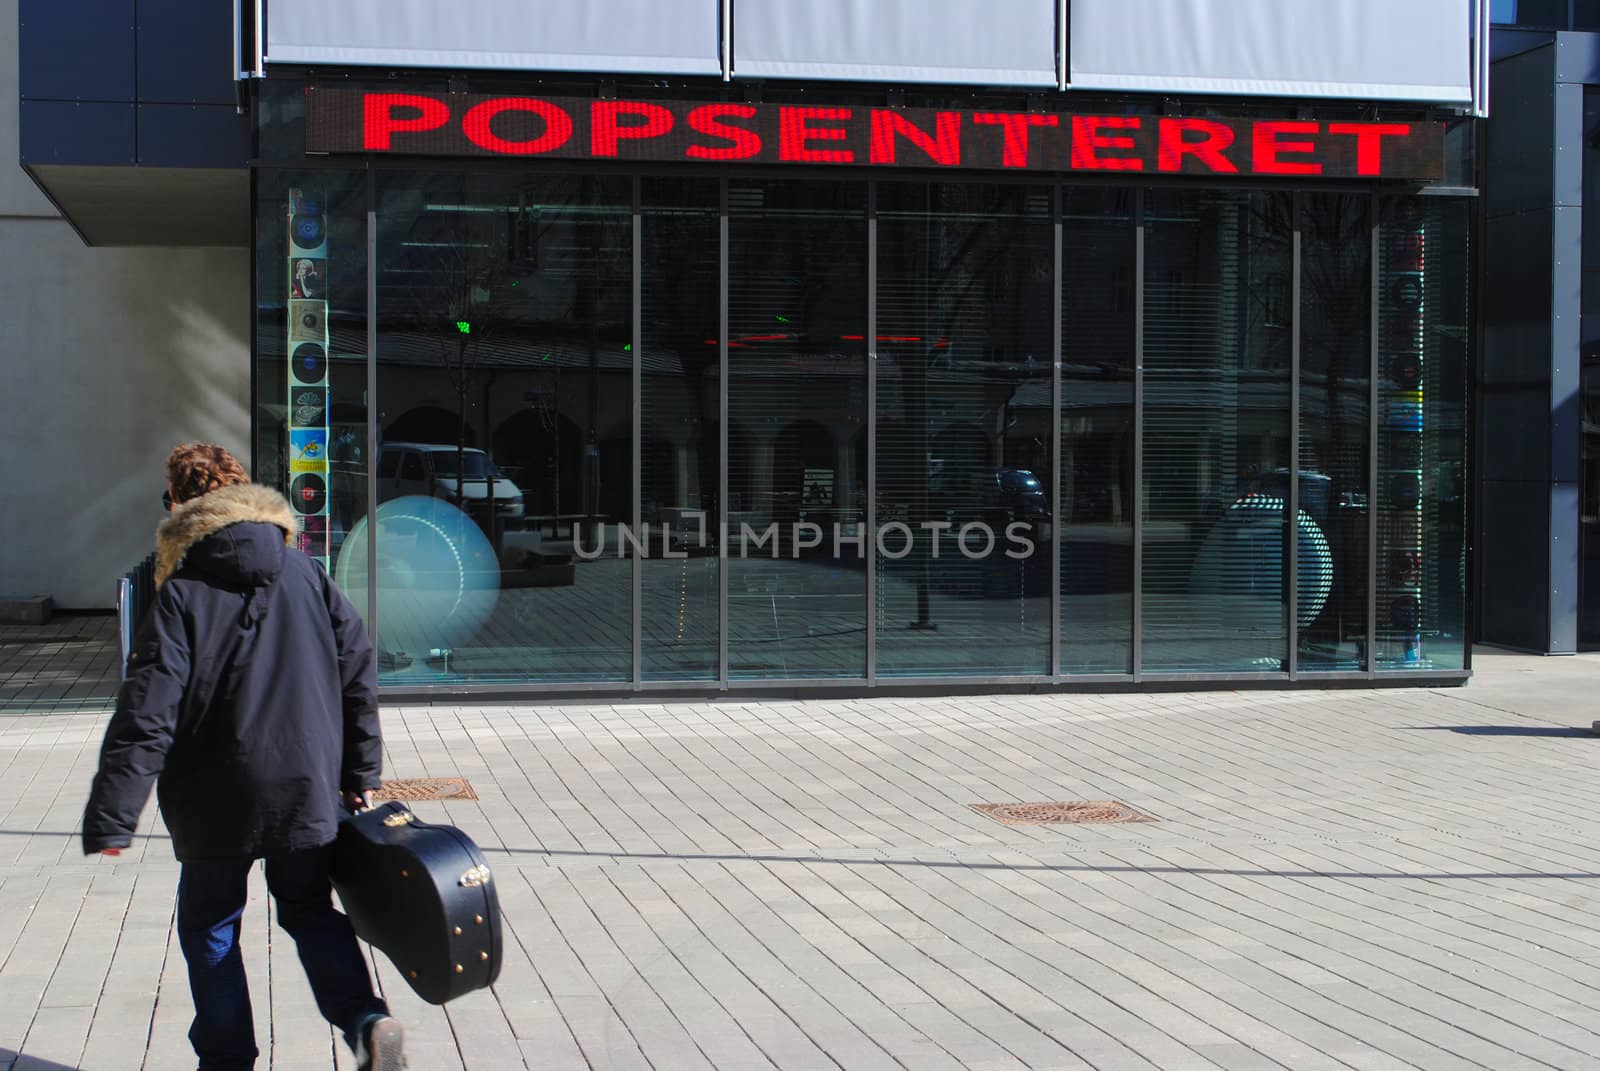 The pop center (Norwegian: Popsenteret) is a museum dedicated to norwegian pop music. It was opened in november 2011 as part of the Schous Culture Brewery at Grünerløkka in Oslo.